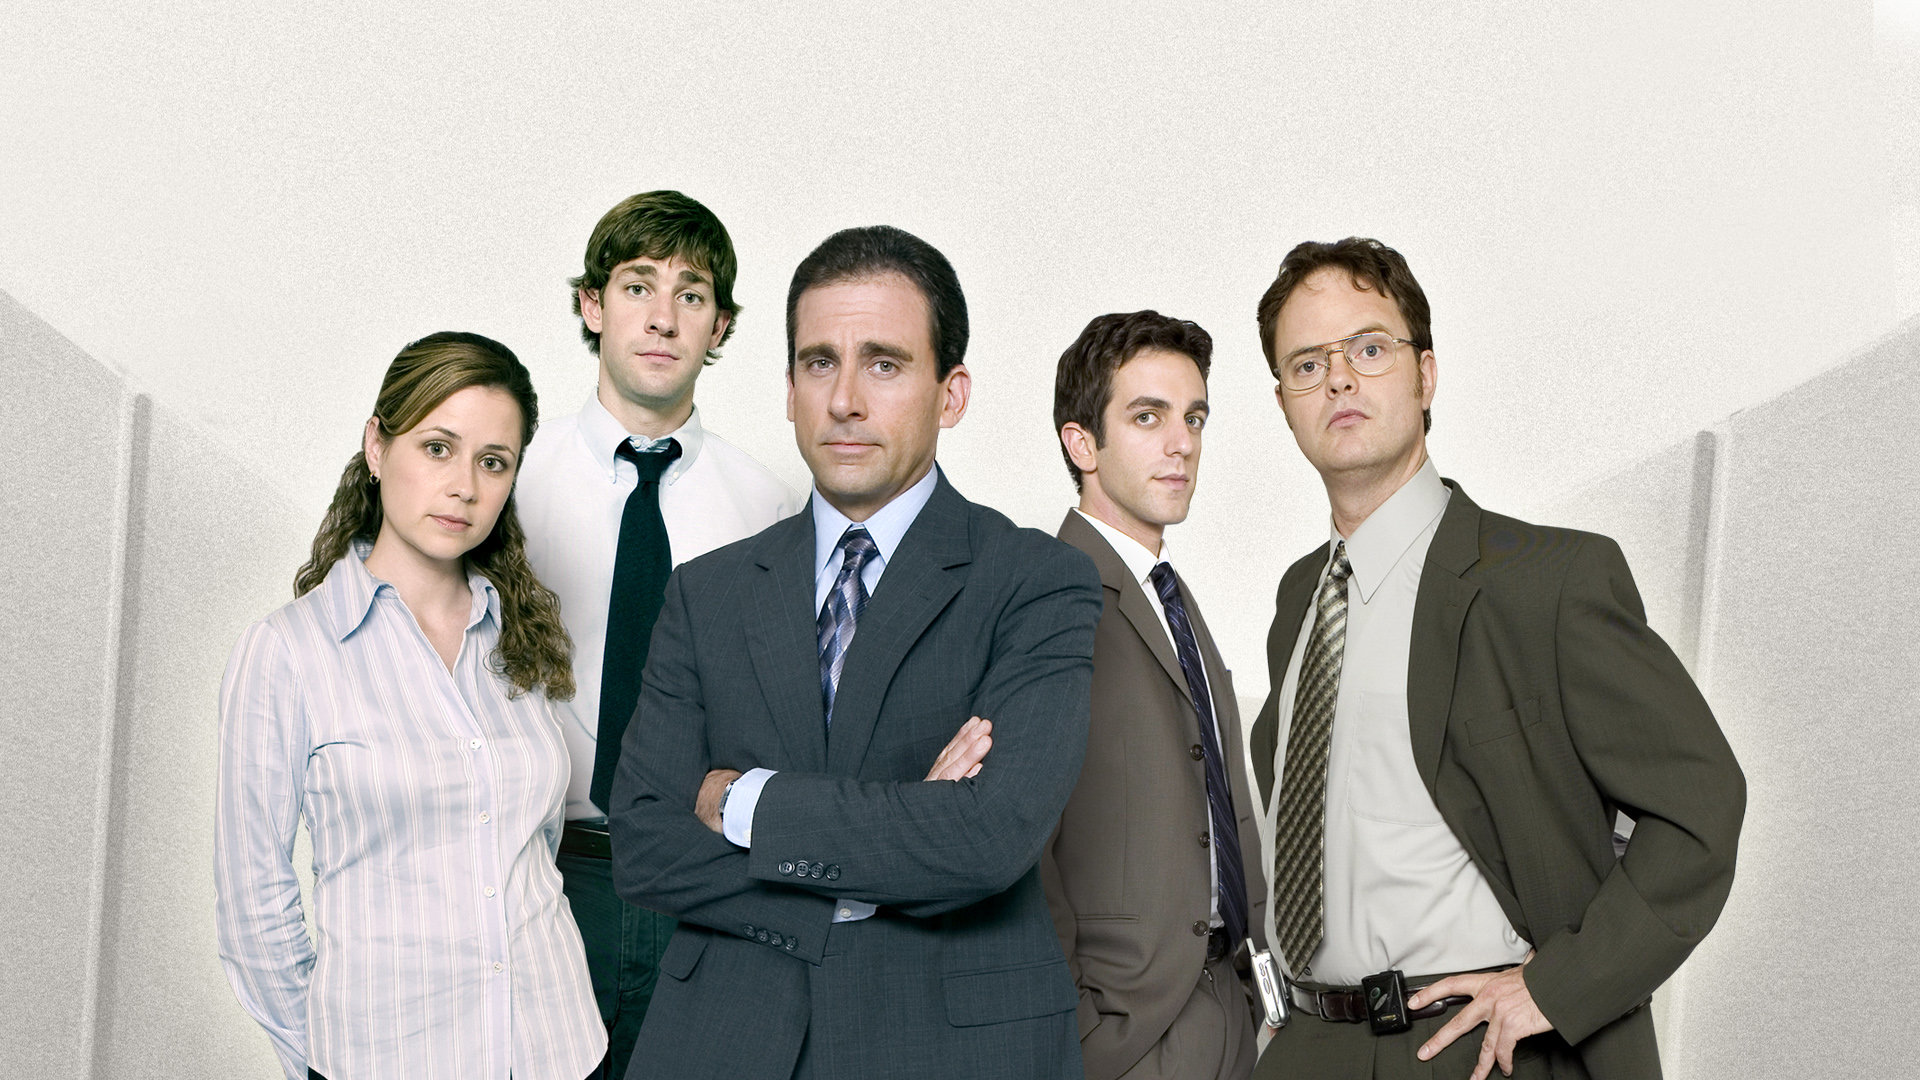 Awesome The Office (US) free wallpaper ID:45990 for full hd 1920x1080 computer